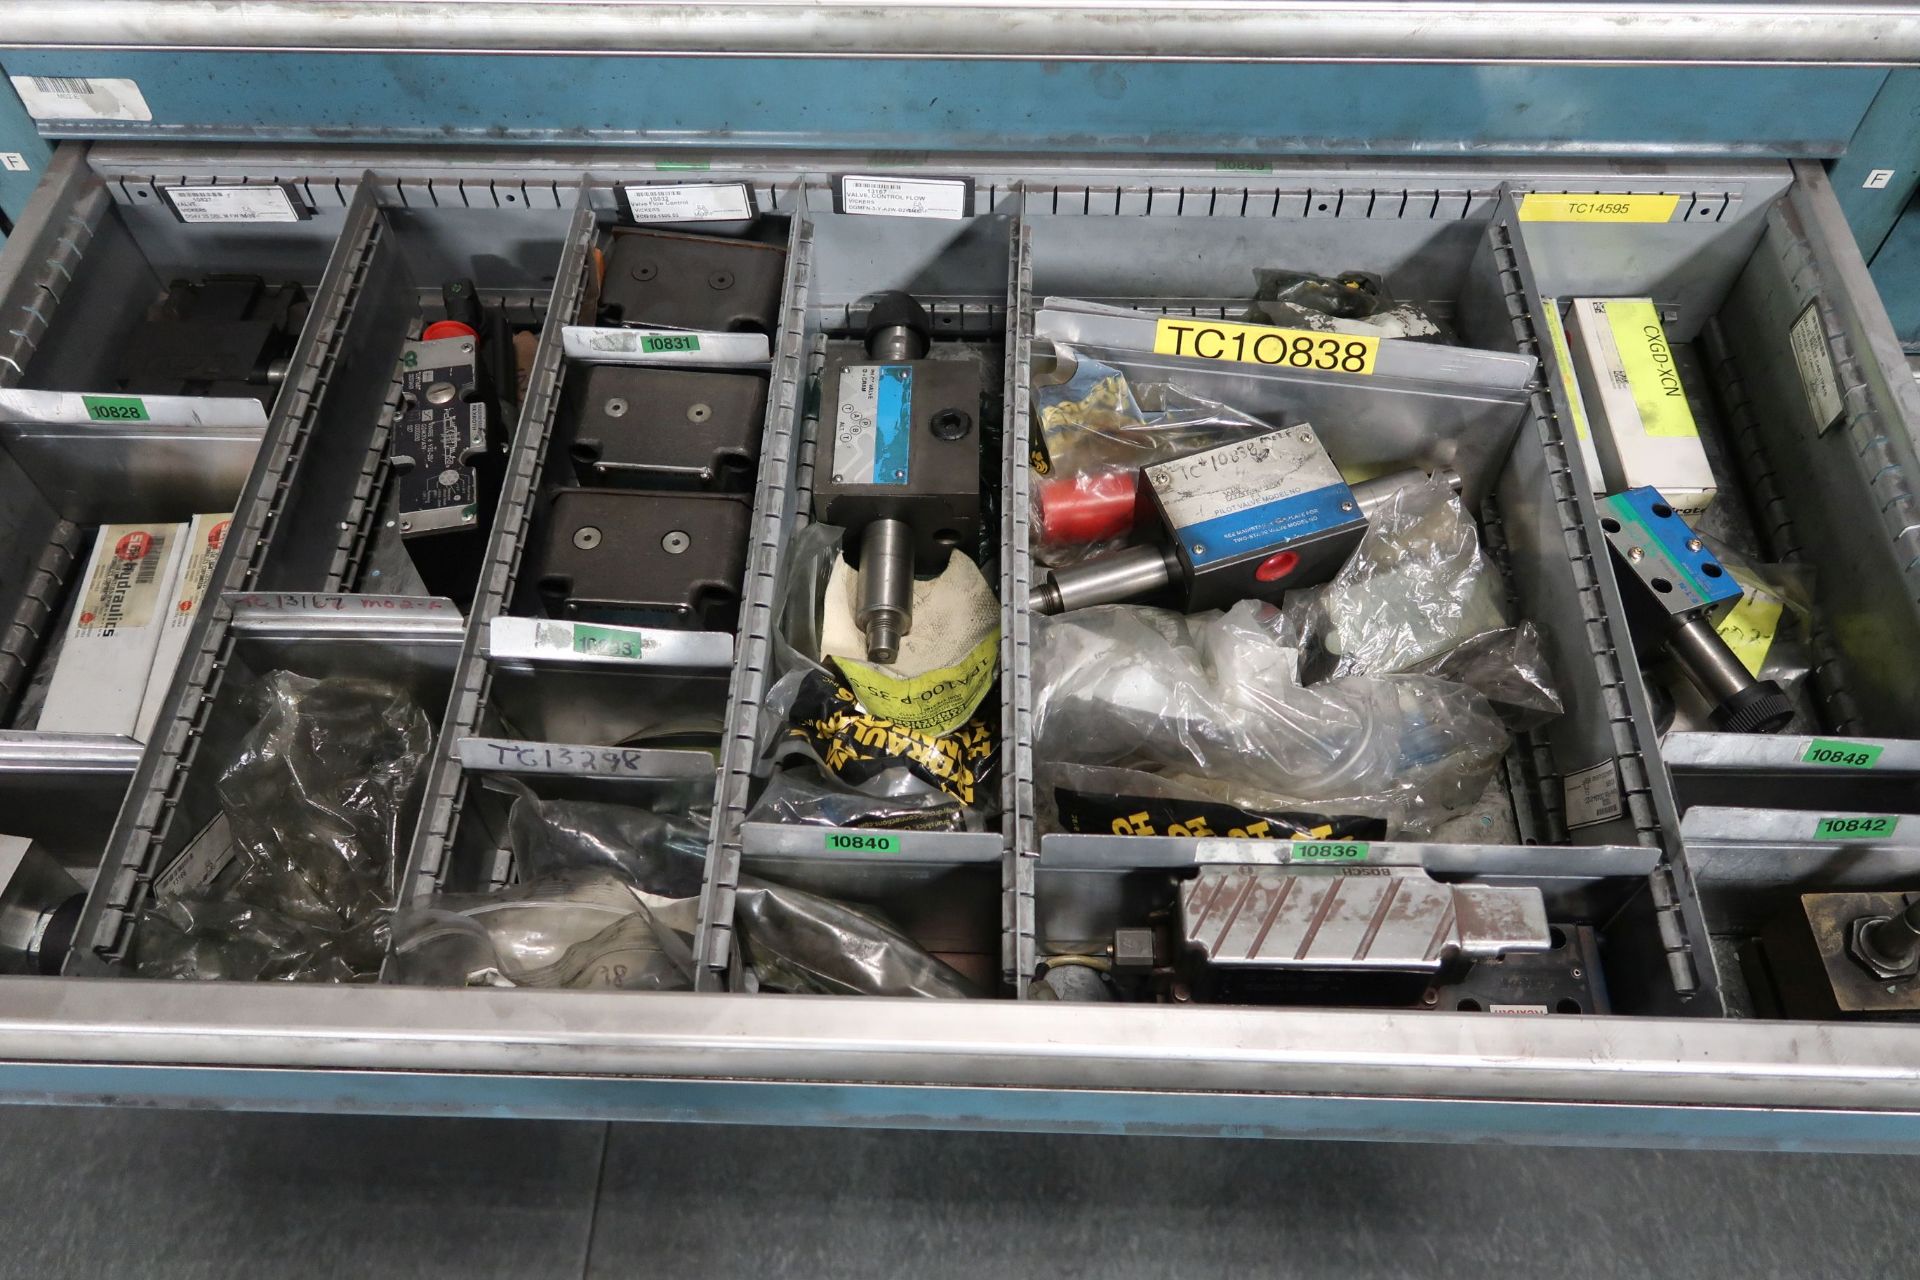 TOOLING CABINETS WITH CONTENTS - MOSTLY MACHINE PARTS **LOADING PRICE DUE TO ERRA - $2,000.00** - Image 10 of 59